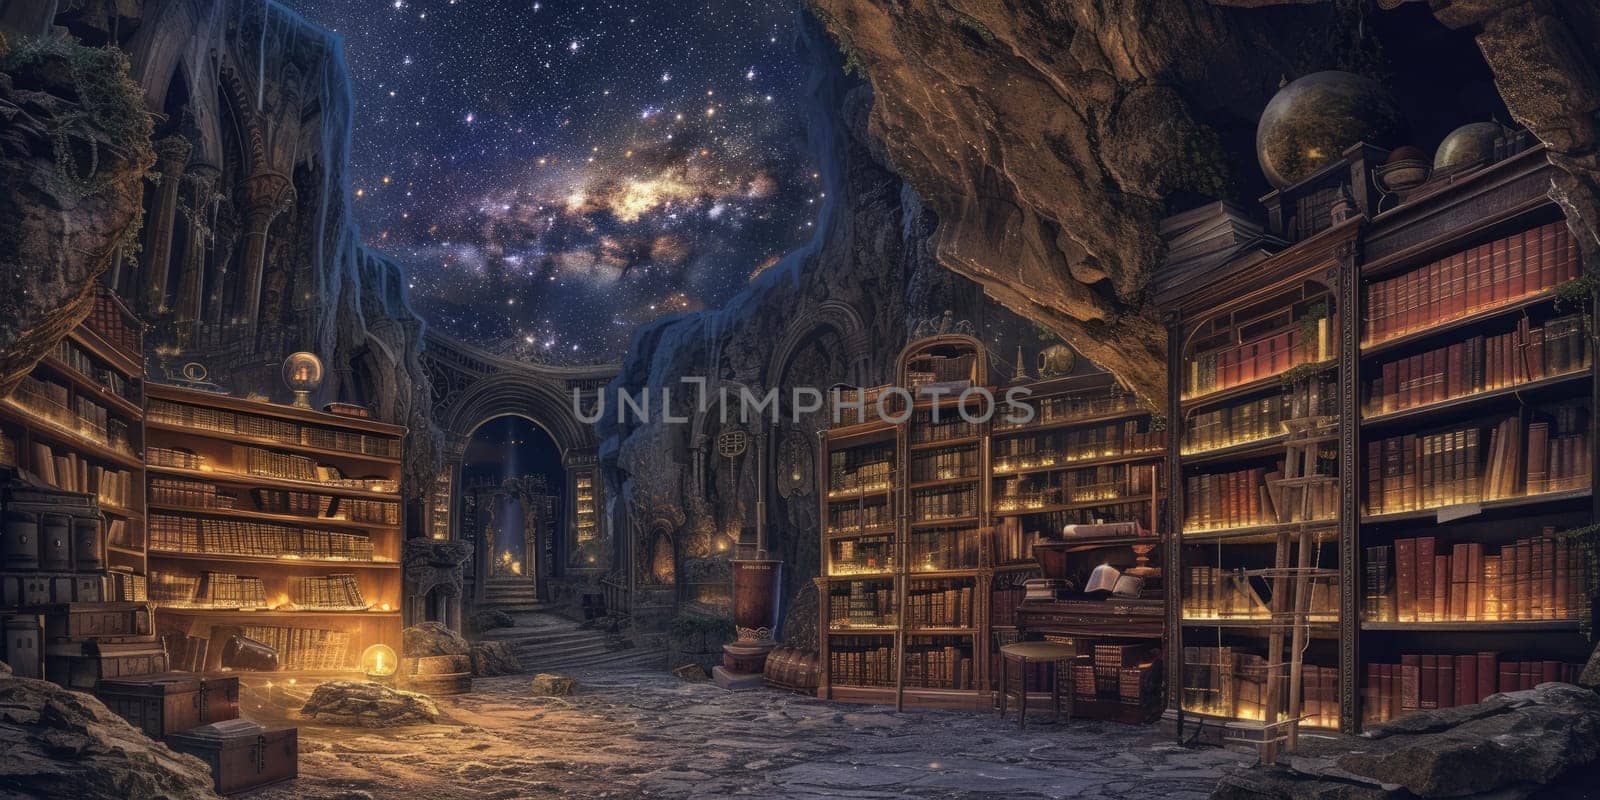 An ancient library filled with magical books, glowing orbs. Resplendent. by biancoblue